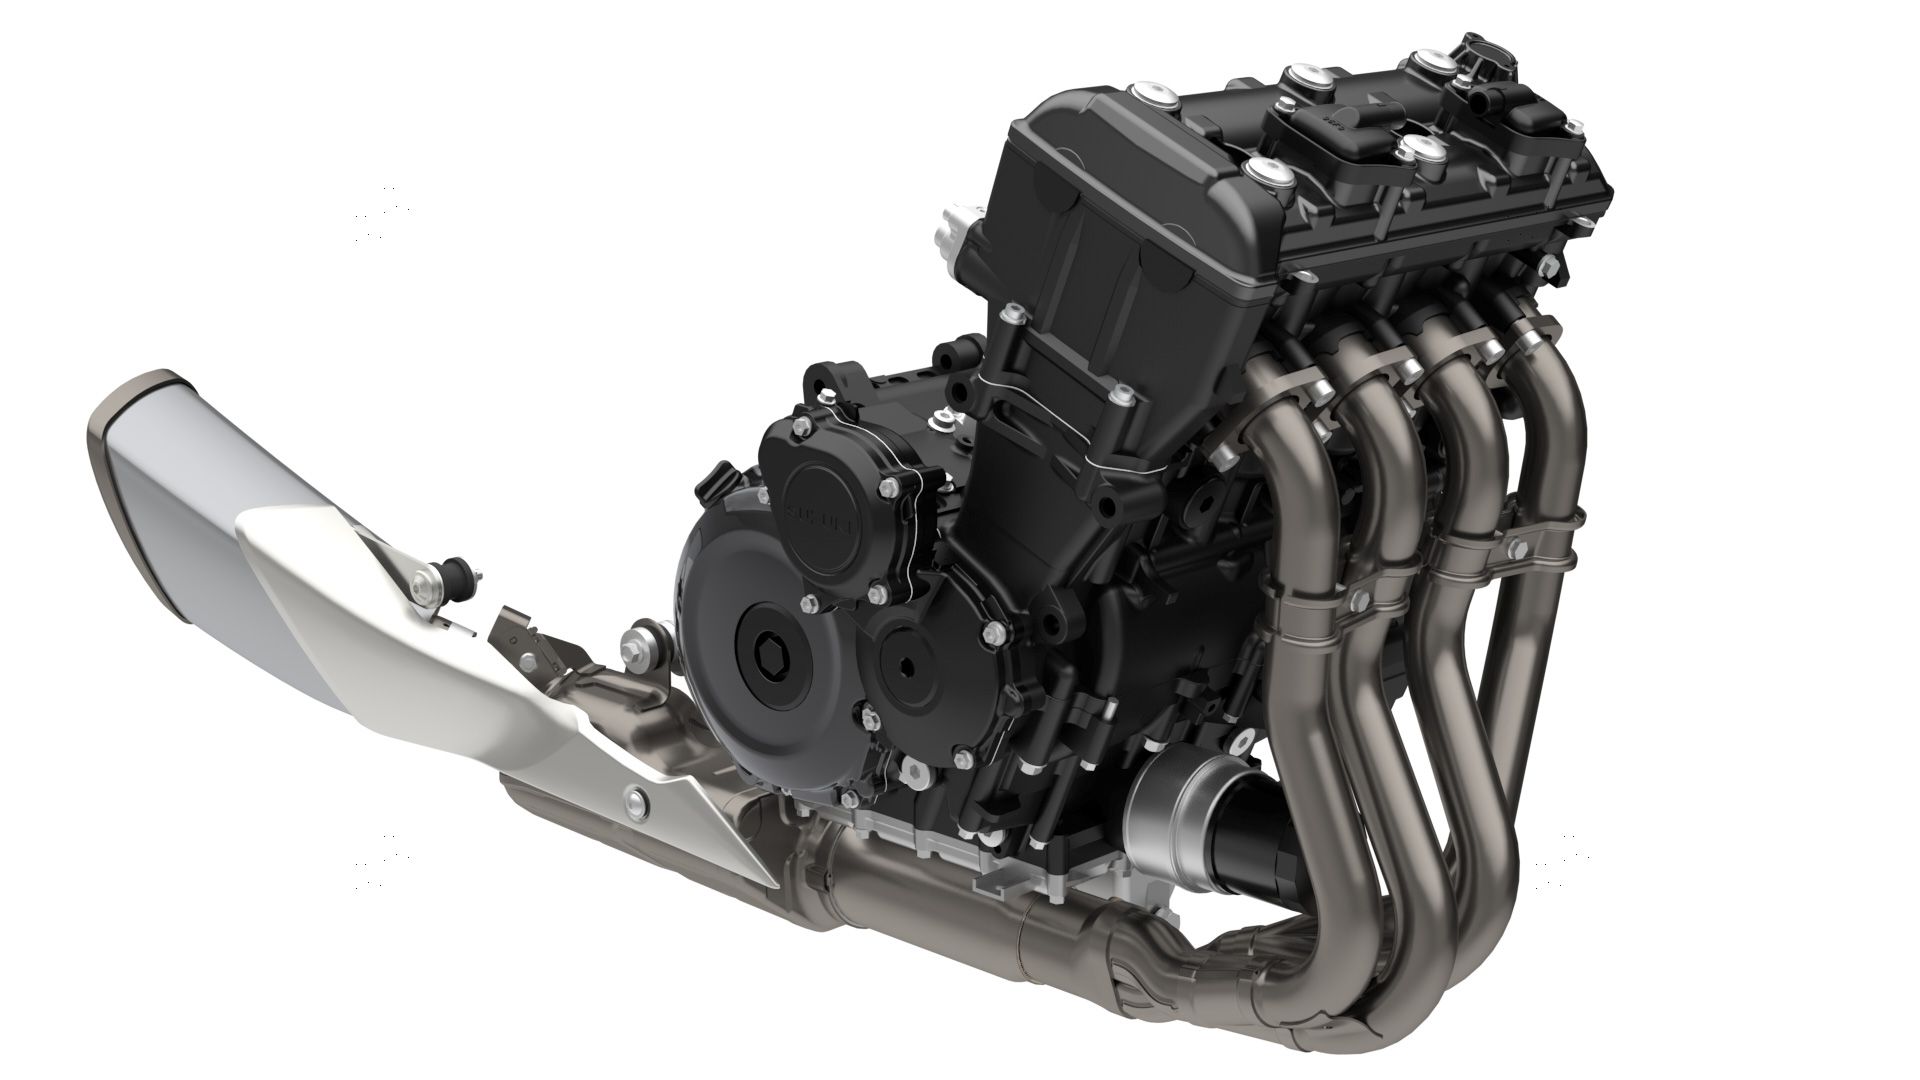 Suzuki tuned the 999cc inline-four specifically for sport-touring duty.